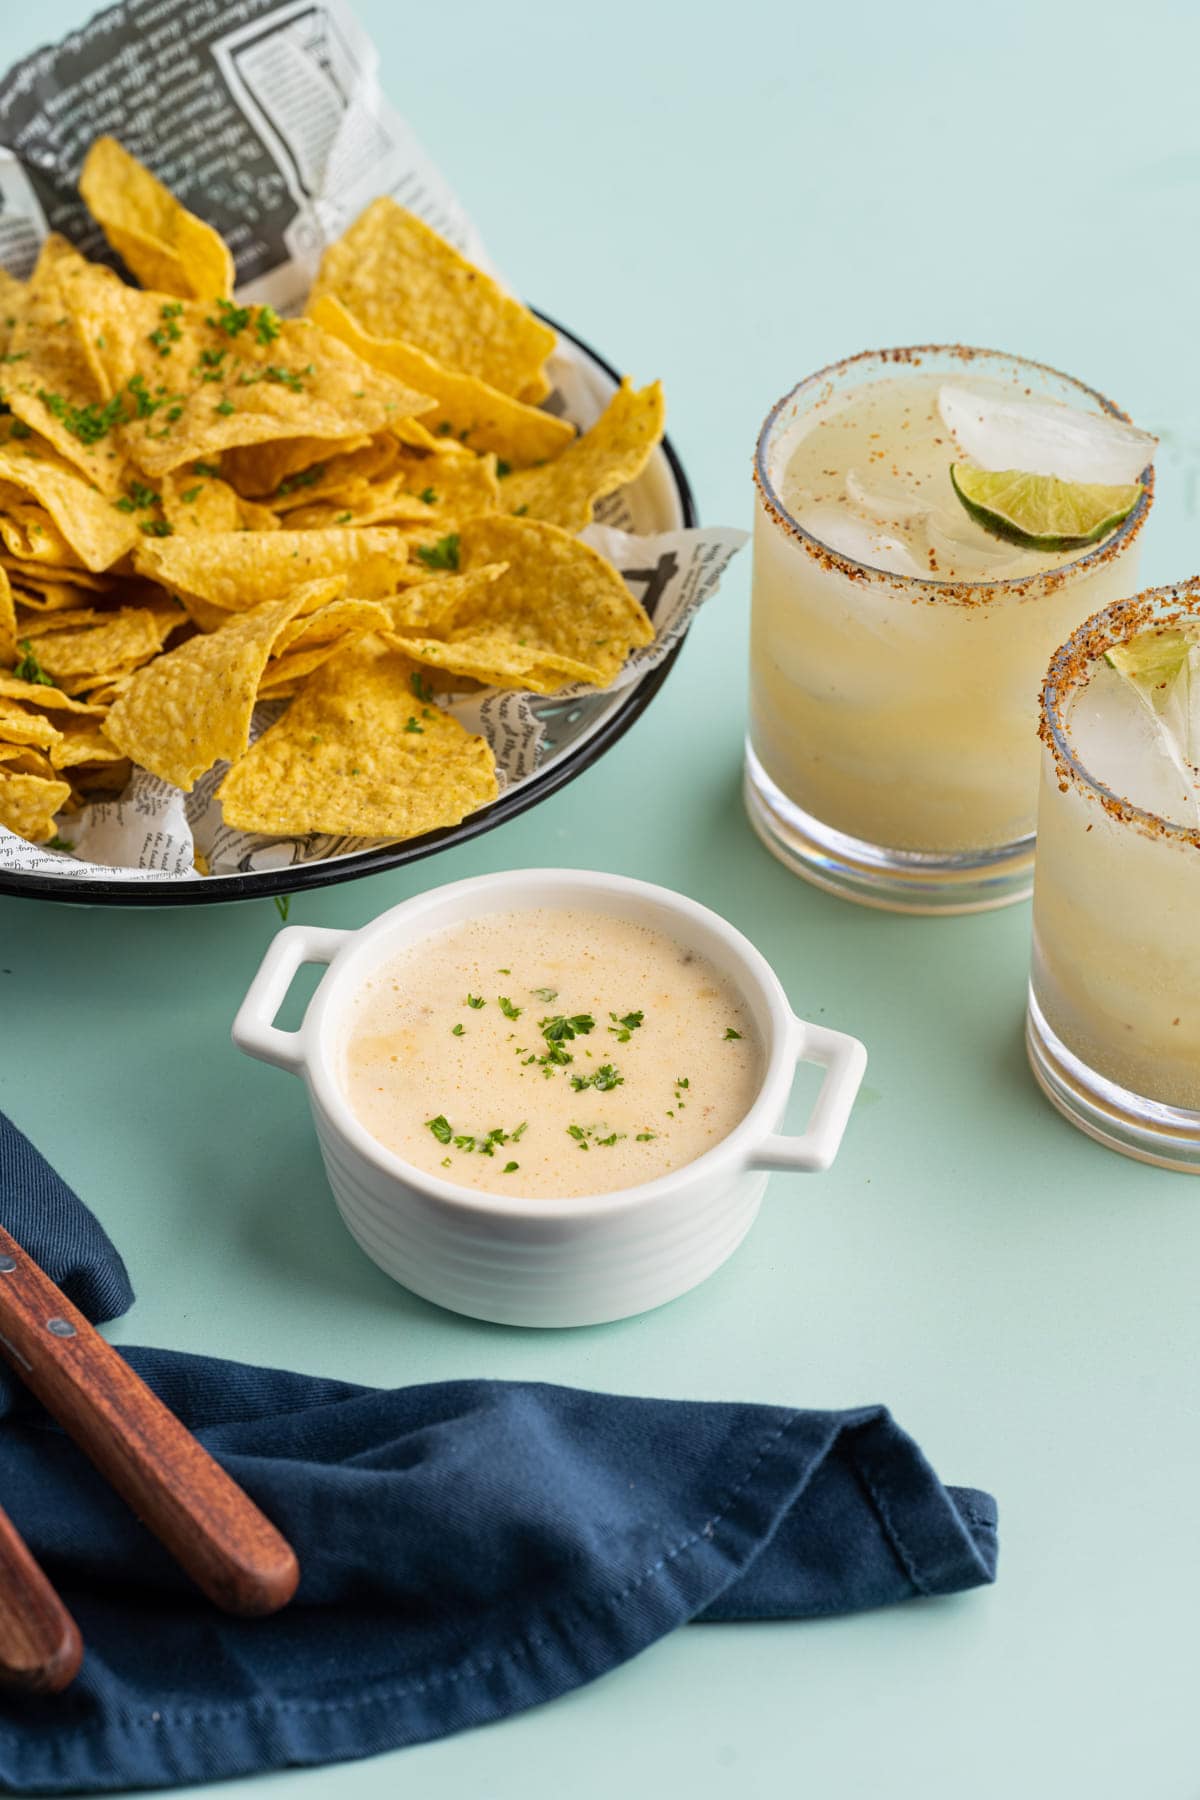 Chips, queso Blanco, and margaritas